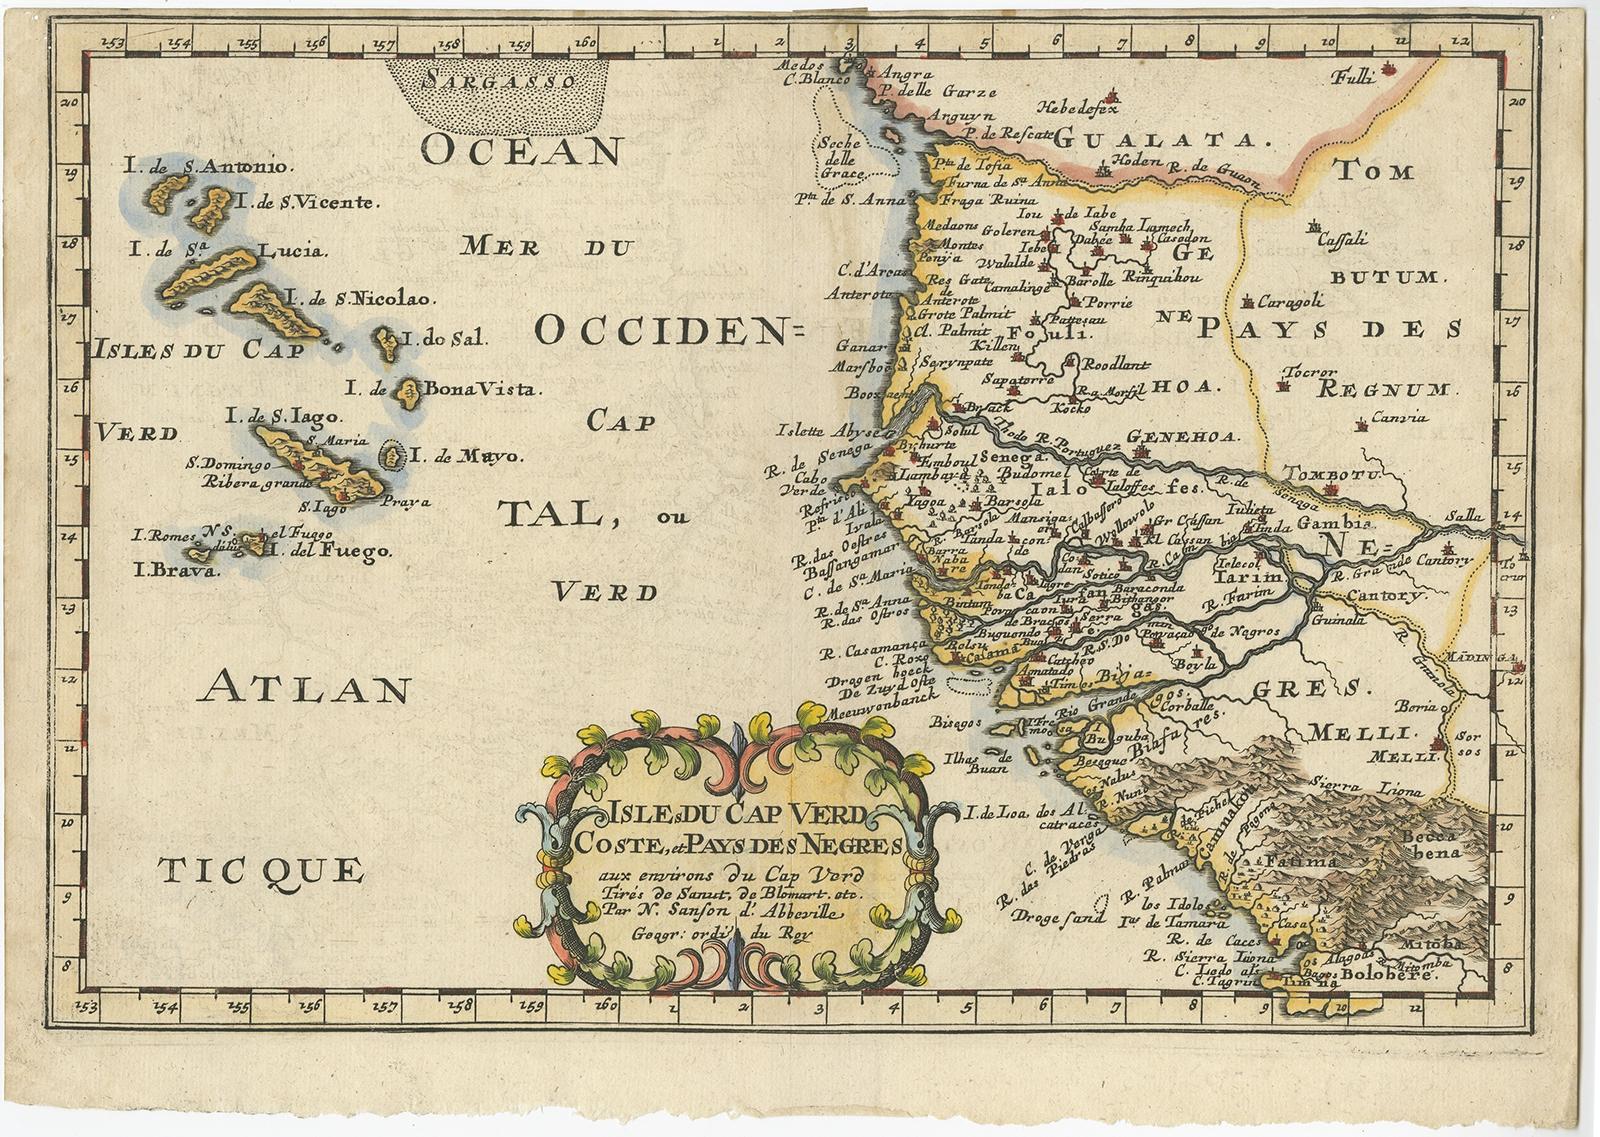 Antique map Africa titled 'Isles du Cap Verd Coste et Pays des Negres'. 

Antique map of the coast of Africa and the Cape Verde islands. 

Artists and Engravers: Nicholas Sanson d'Abbeville (1600 - 1667) and his descendents were important French